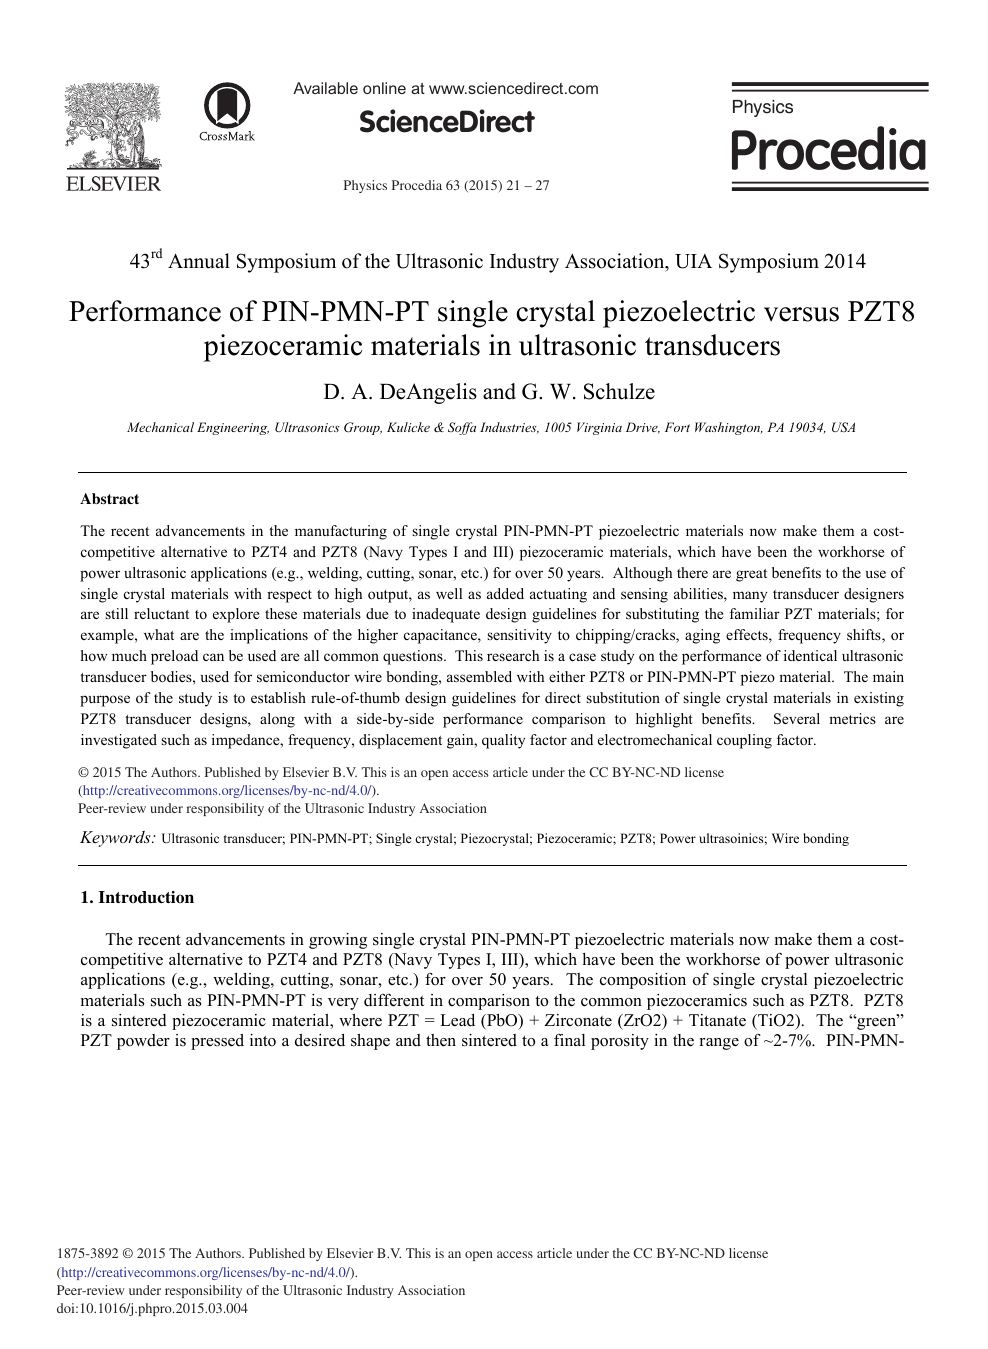 Performance Of Pin Pmn Pt Single Crystal Piezoelectric Versus Pzt8 Piezoceramic Materials In Ultrasonic Transducers Topic Of Research Paper In Materials Engineering Download Scholarly Article Pdf And Read For Free On Cyberleninka Open